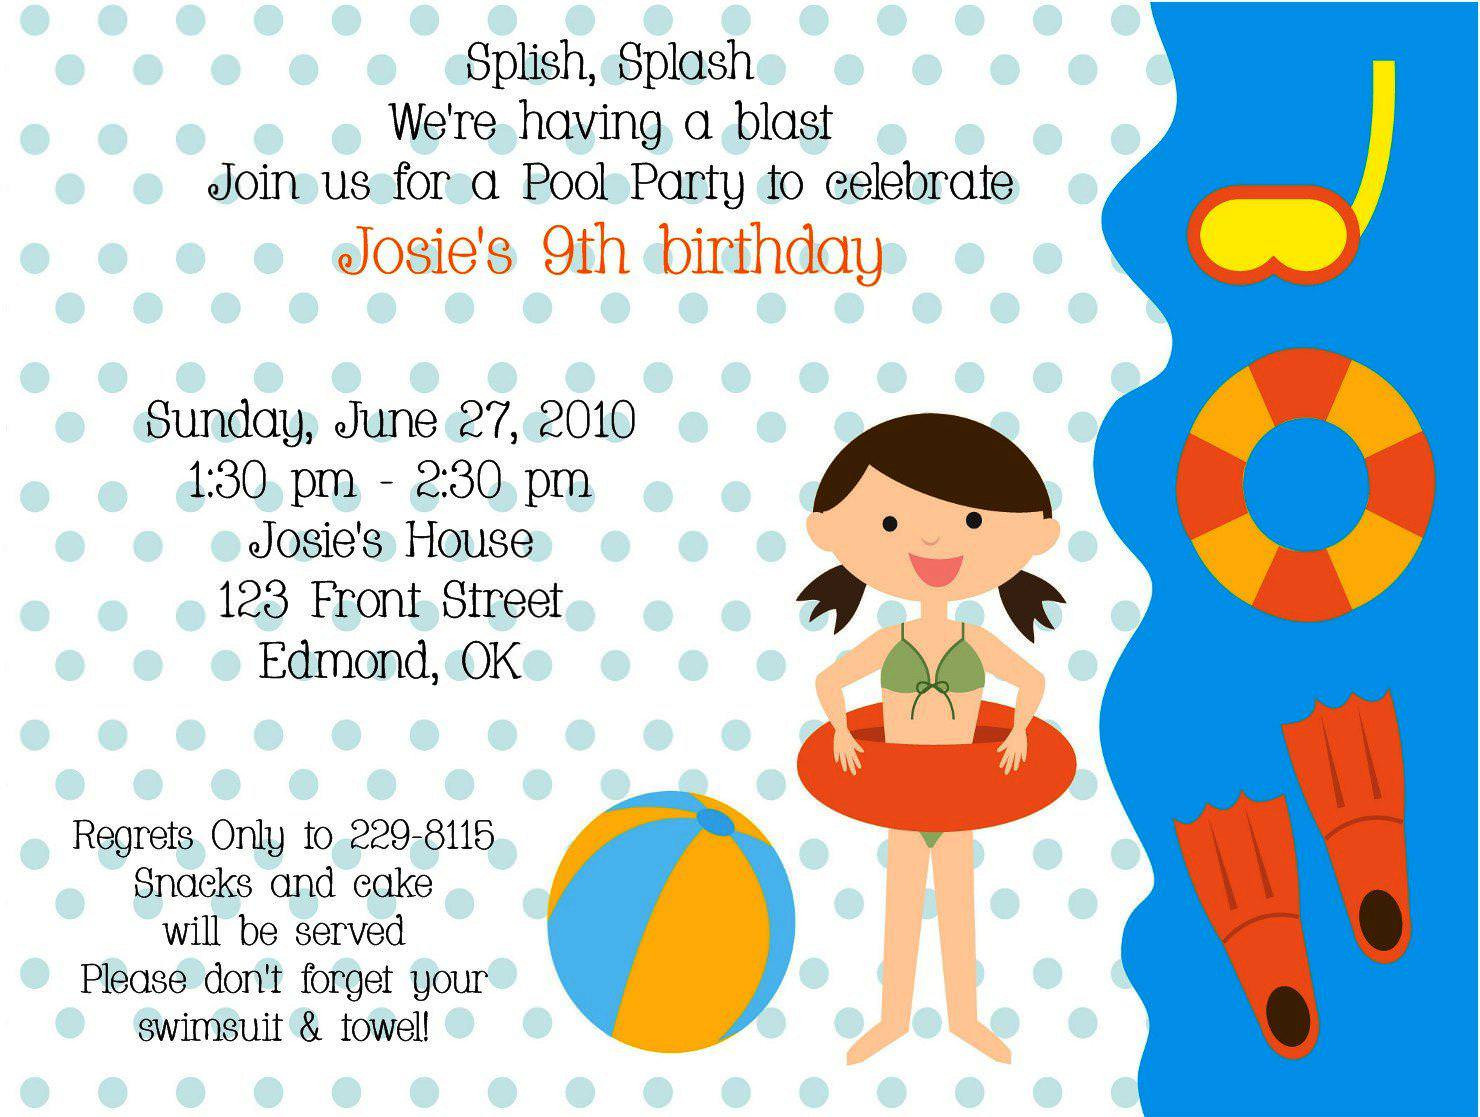 Kids Birthday Party Invitation Messages
 21 Kids Birthday Invitation Wording That We Can Make